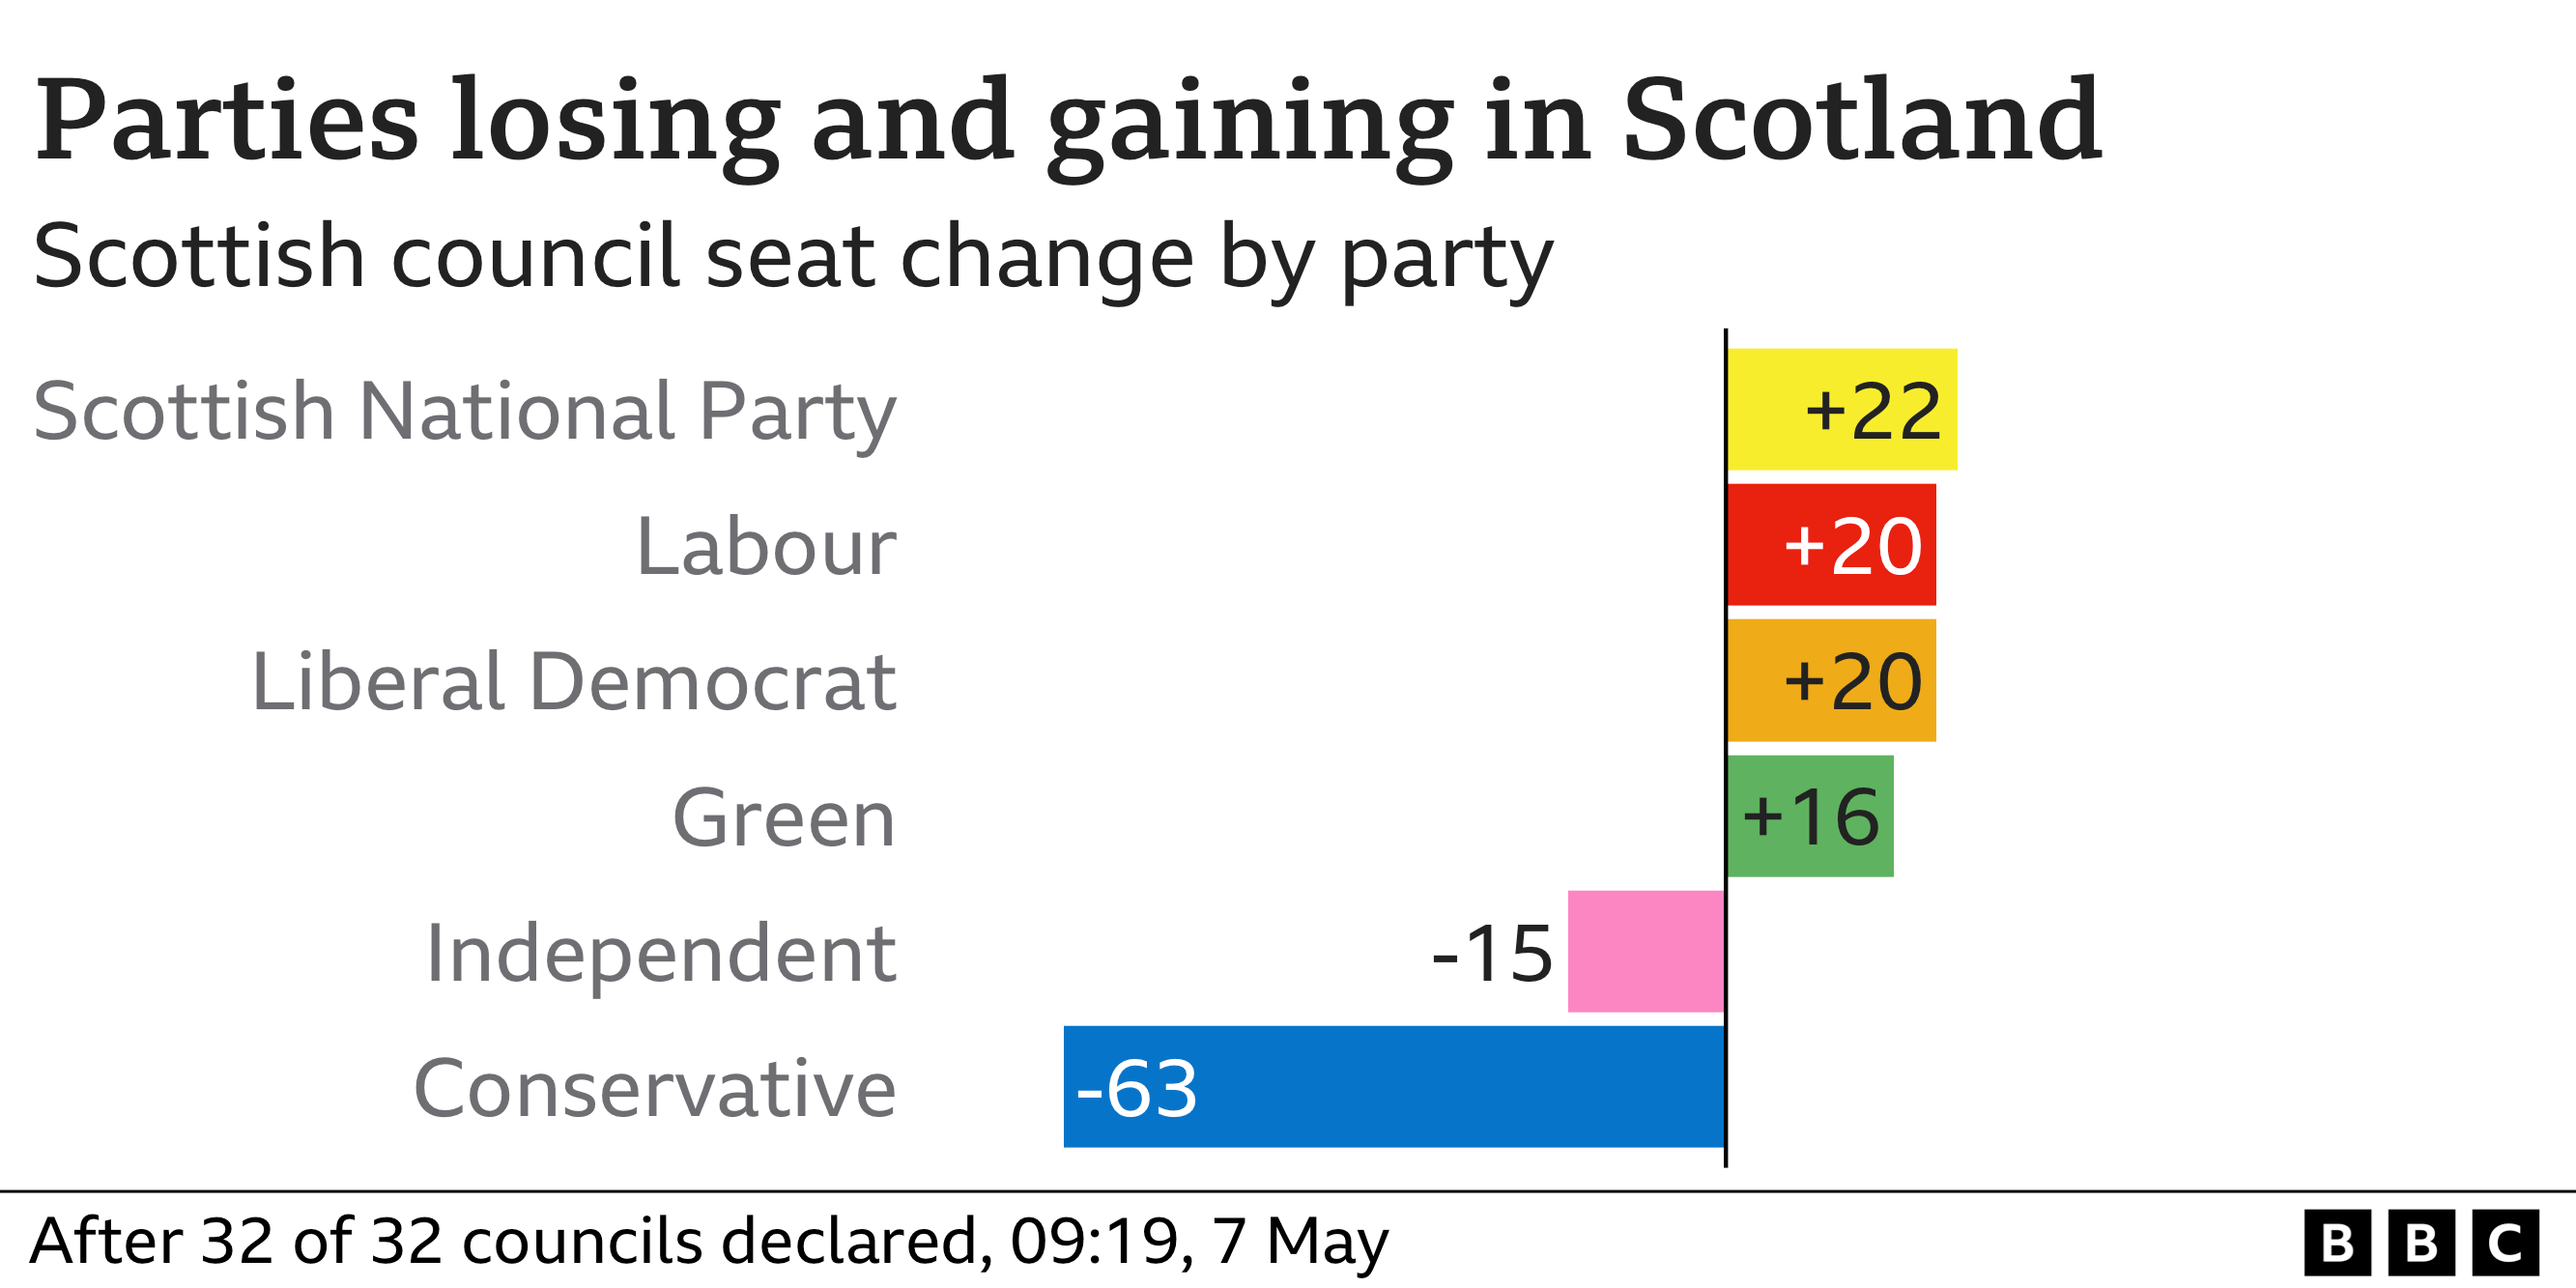 Chart showing change in the number of councillors for largest parties in Scotland. Scottish National Party change 22, Labour change 20, Liberal Democrat change 20, Green change 16, Independent change -15, Conservative change -63